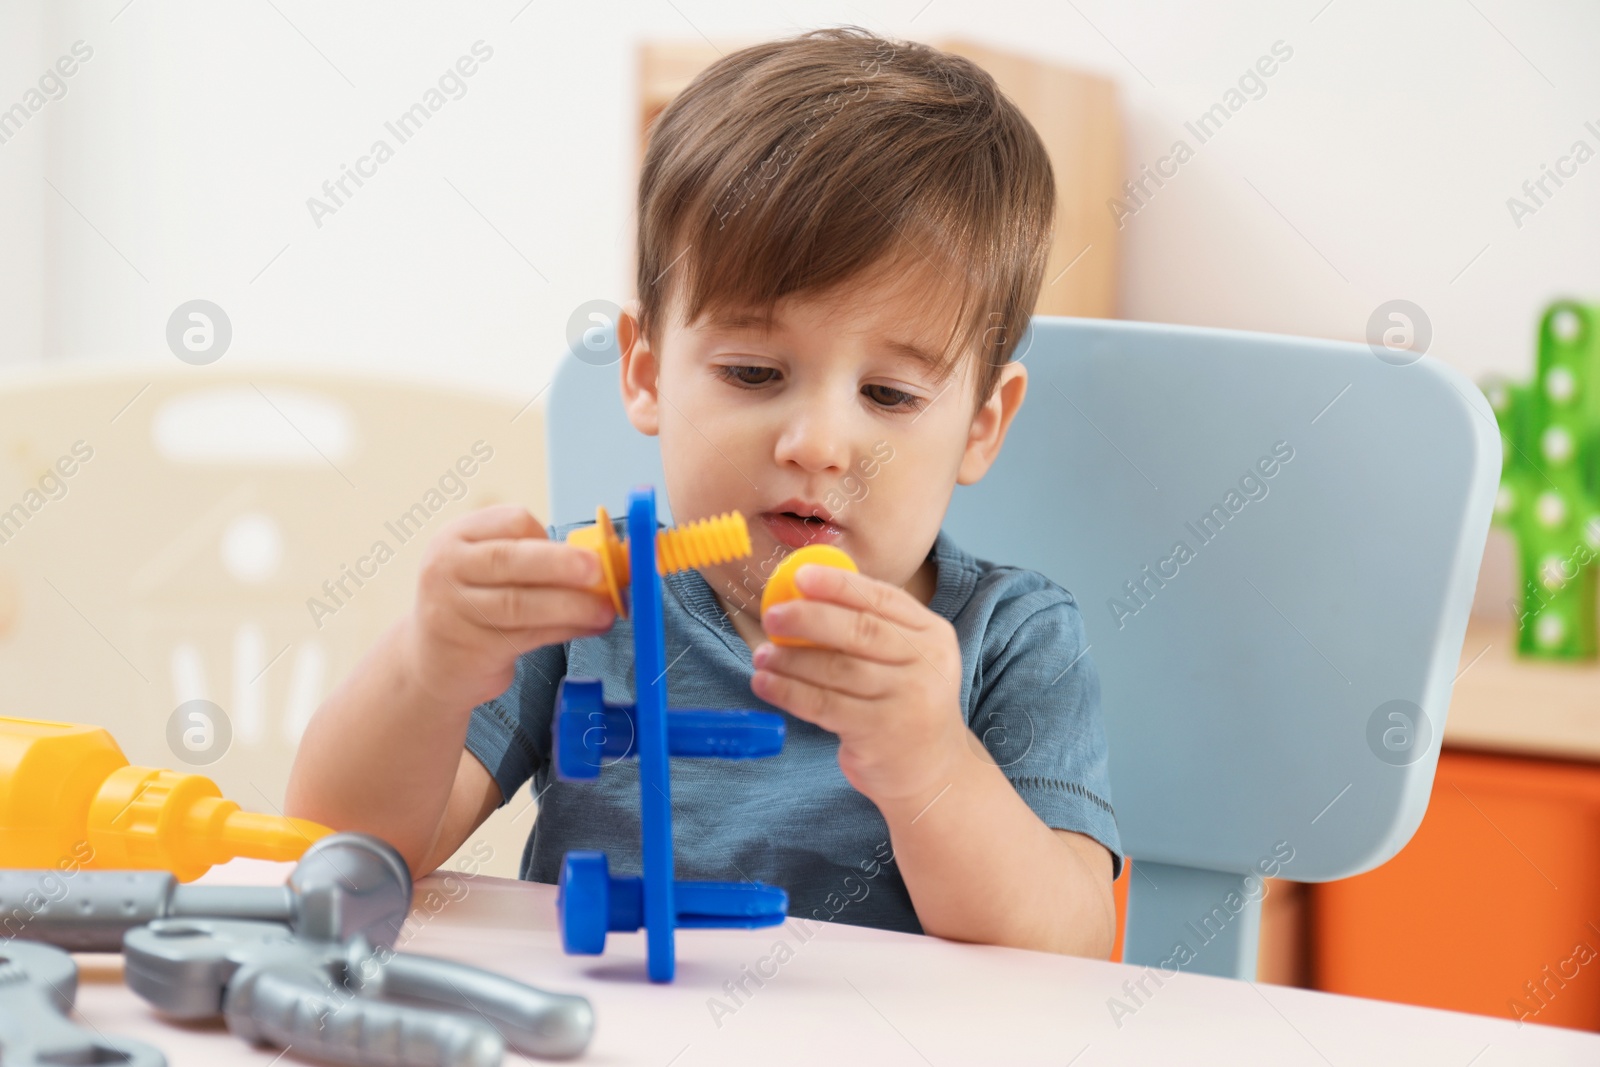 Photo of Little child playing with toy construction tools at table